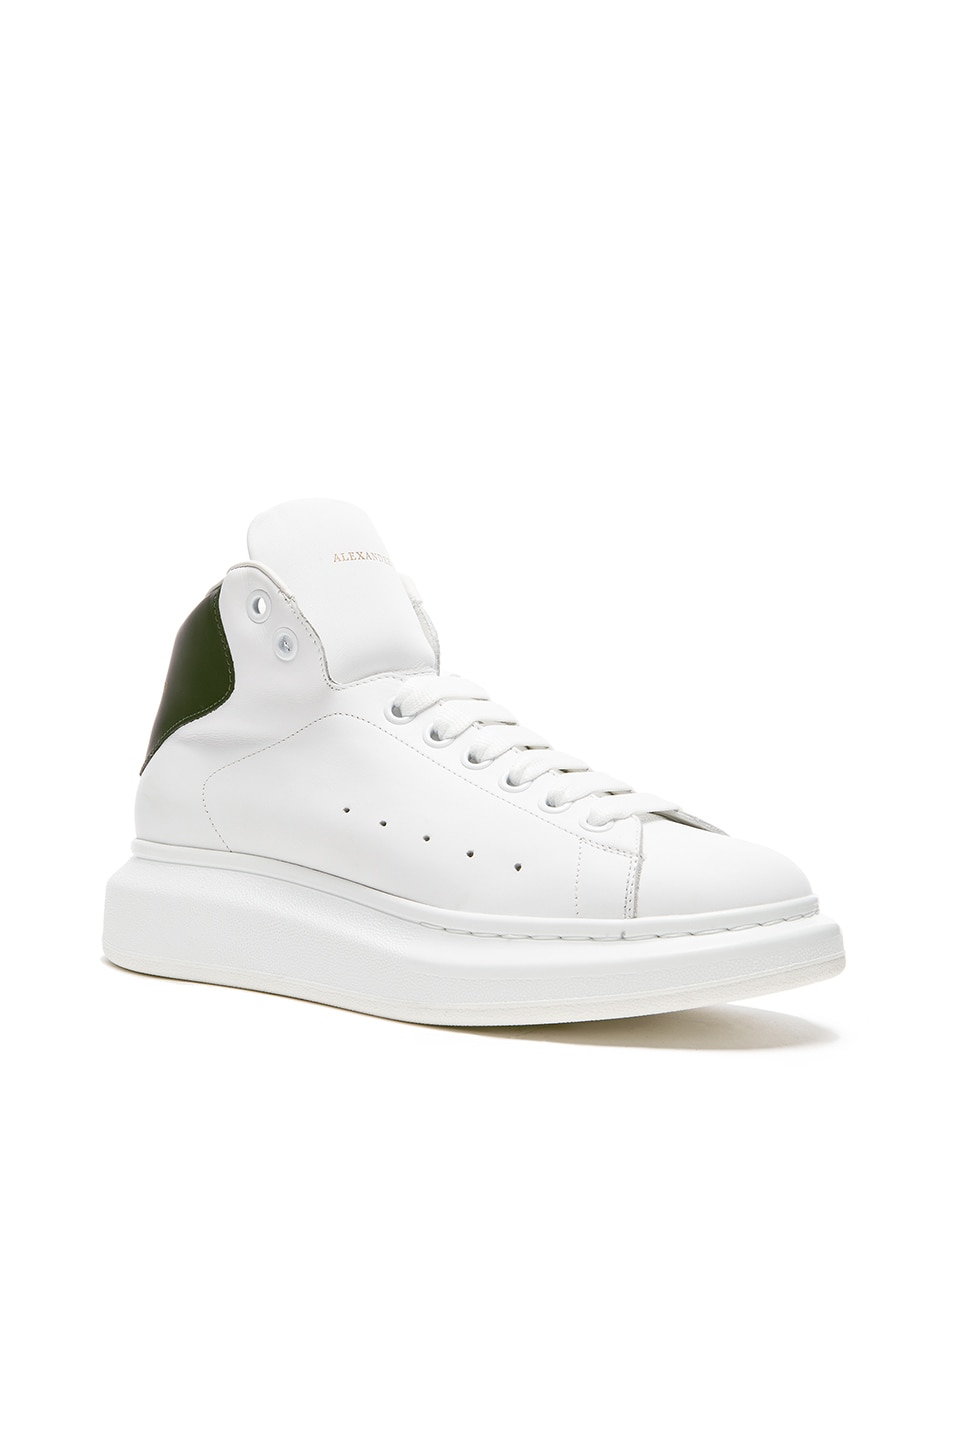 Image 1 of Alexander McQueen Exaggerated Sole High Top Leather Sneakers in Bottle Green & White